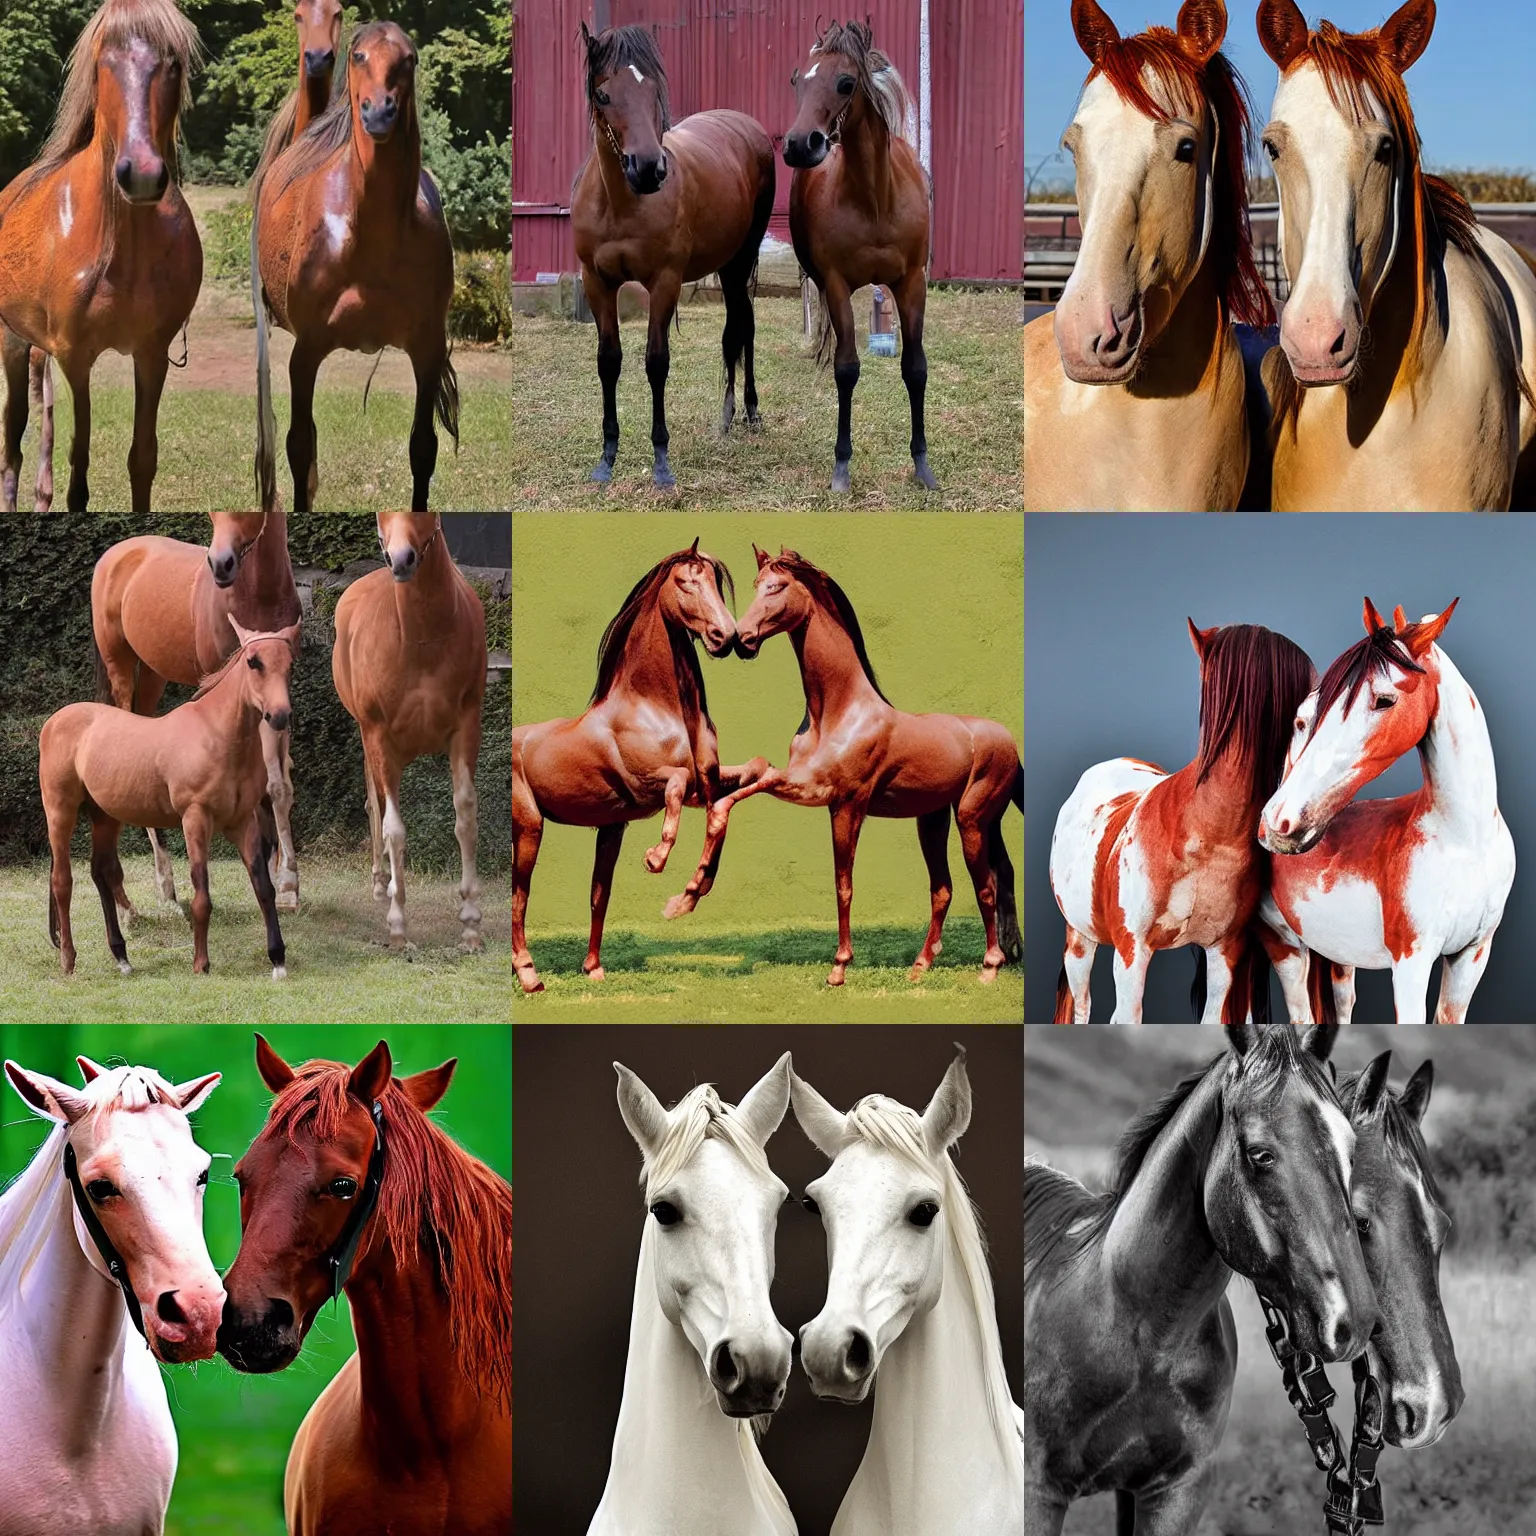 Prompt: conjoined conjoined conjoined conjoined conjoined conjoined conjoined conjoined conjoined conjoined conjoined conjoined conjoined conjoined conjoined conjoined conjoined conjoined horses, same body, same body, two heads one body, colors, photograph